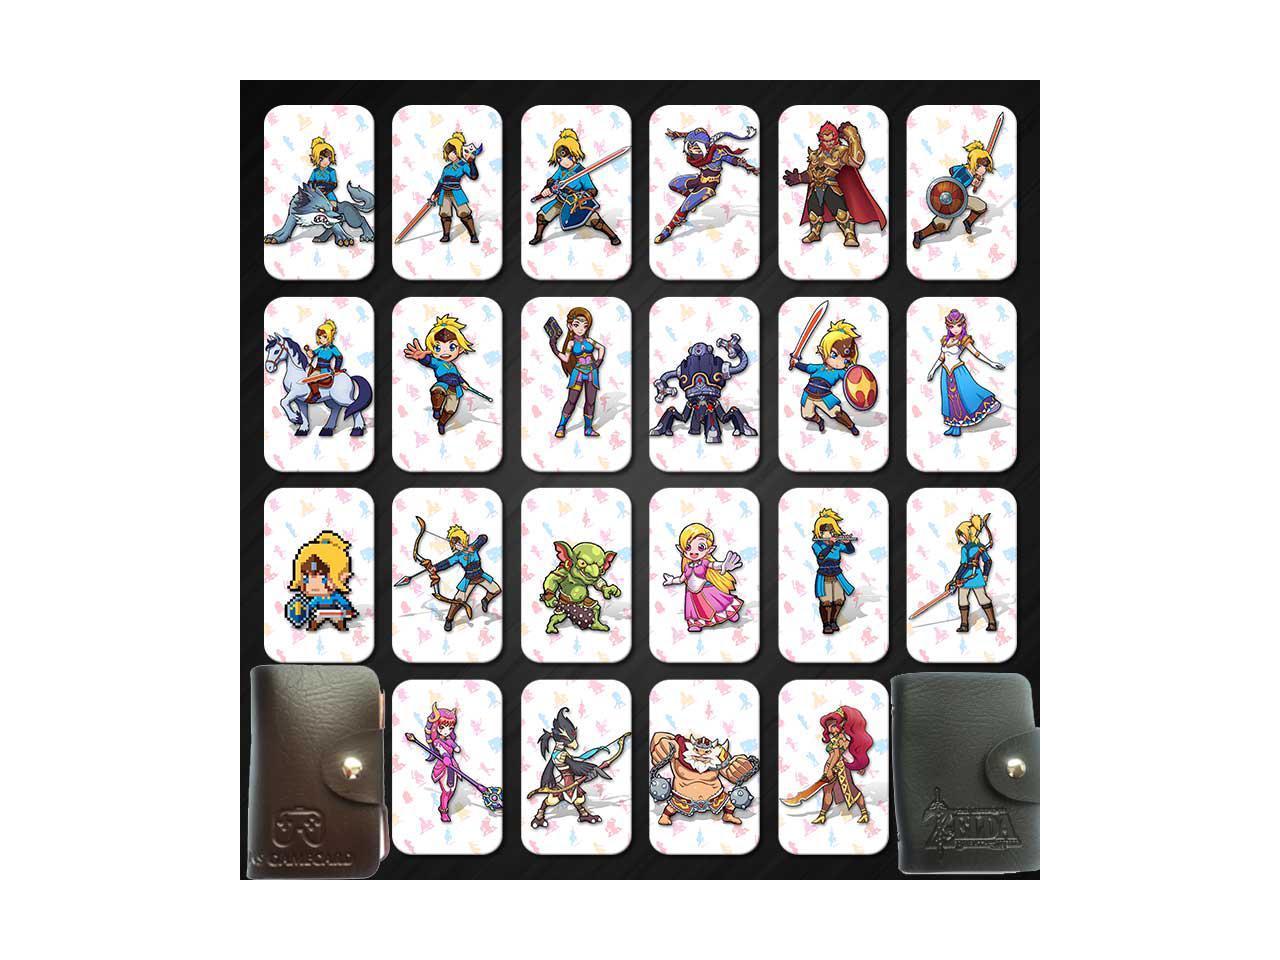 tåge finansiere Arne Amiibo Figurine Substitute Cards | (NFC TAGS) For 6 Games | Nintendo Core